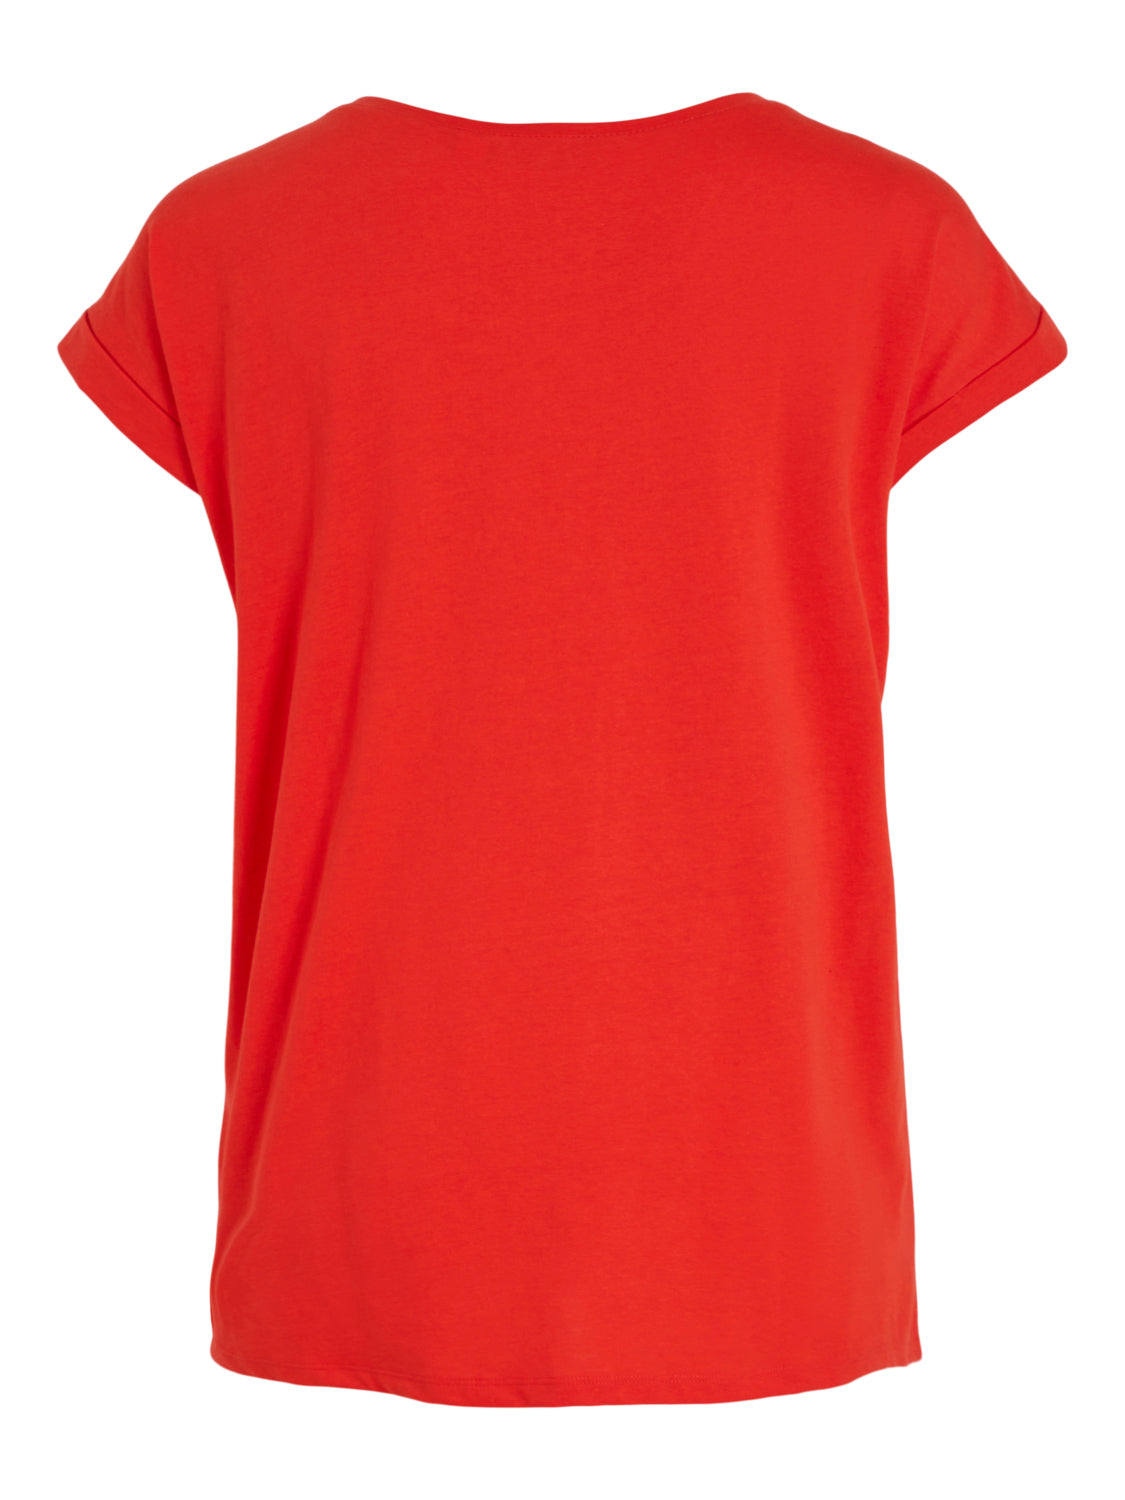 VIDREAMERS T-Shirts & Tops - Flame Scarlet